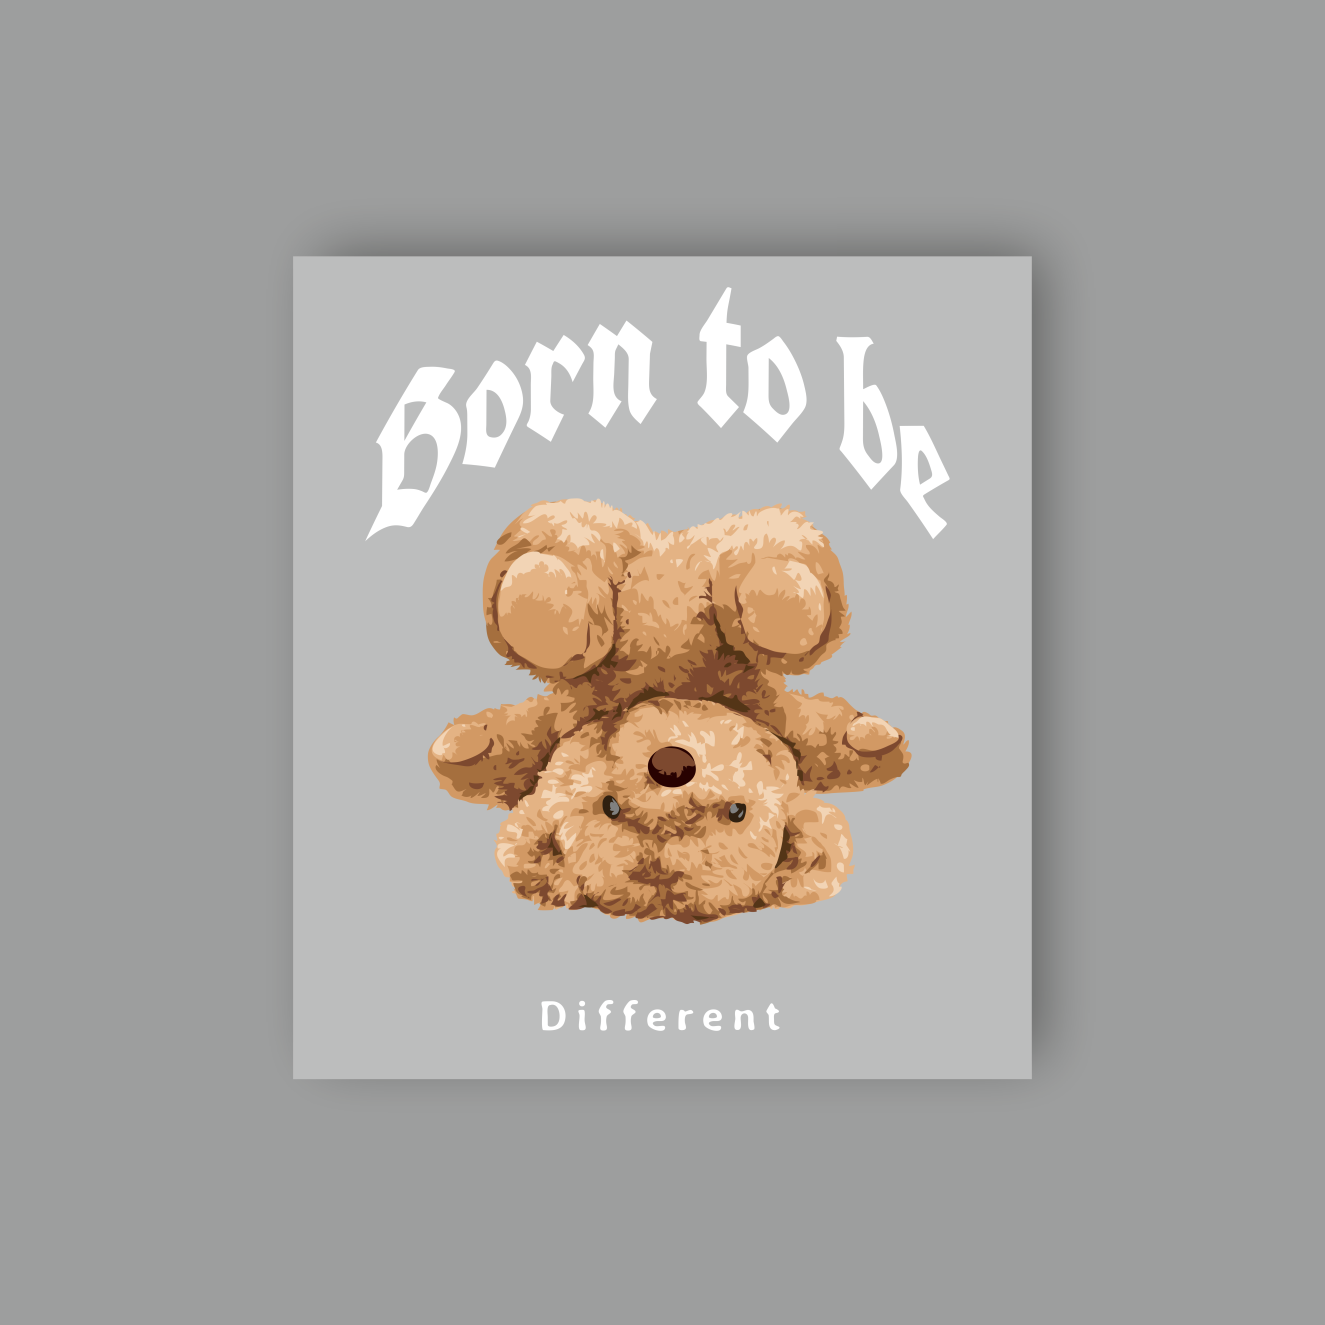 Born to be different